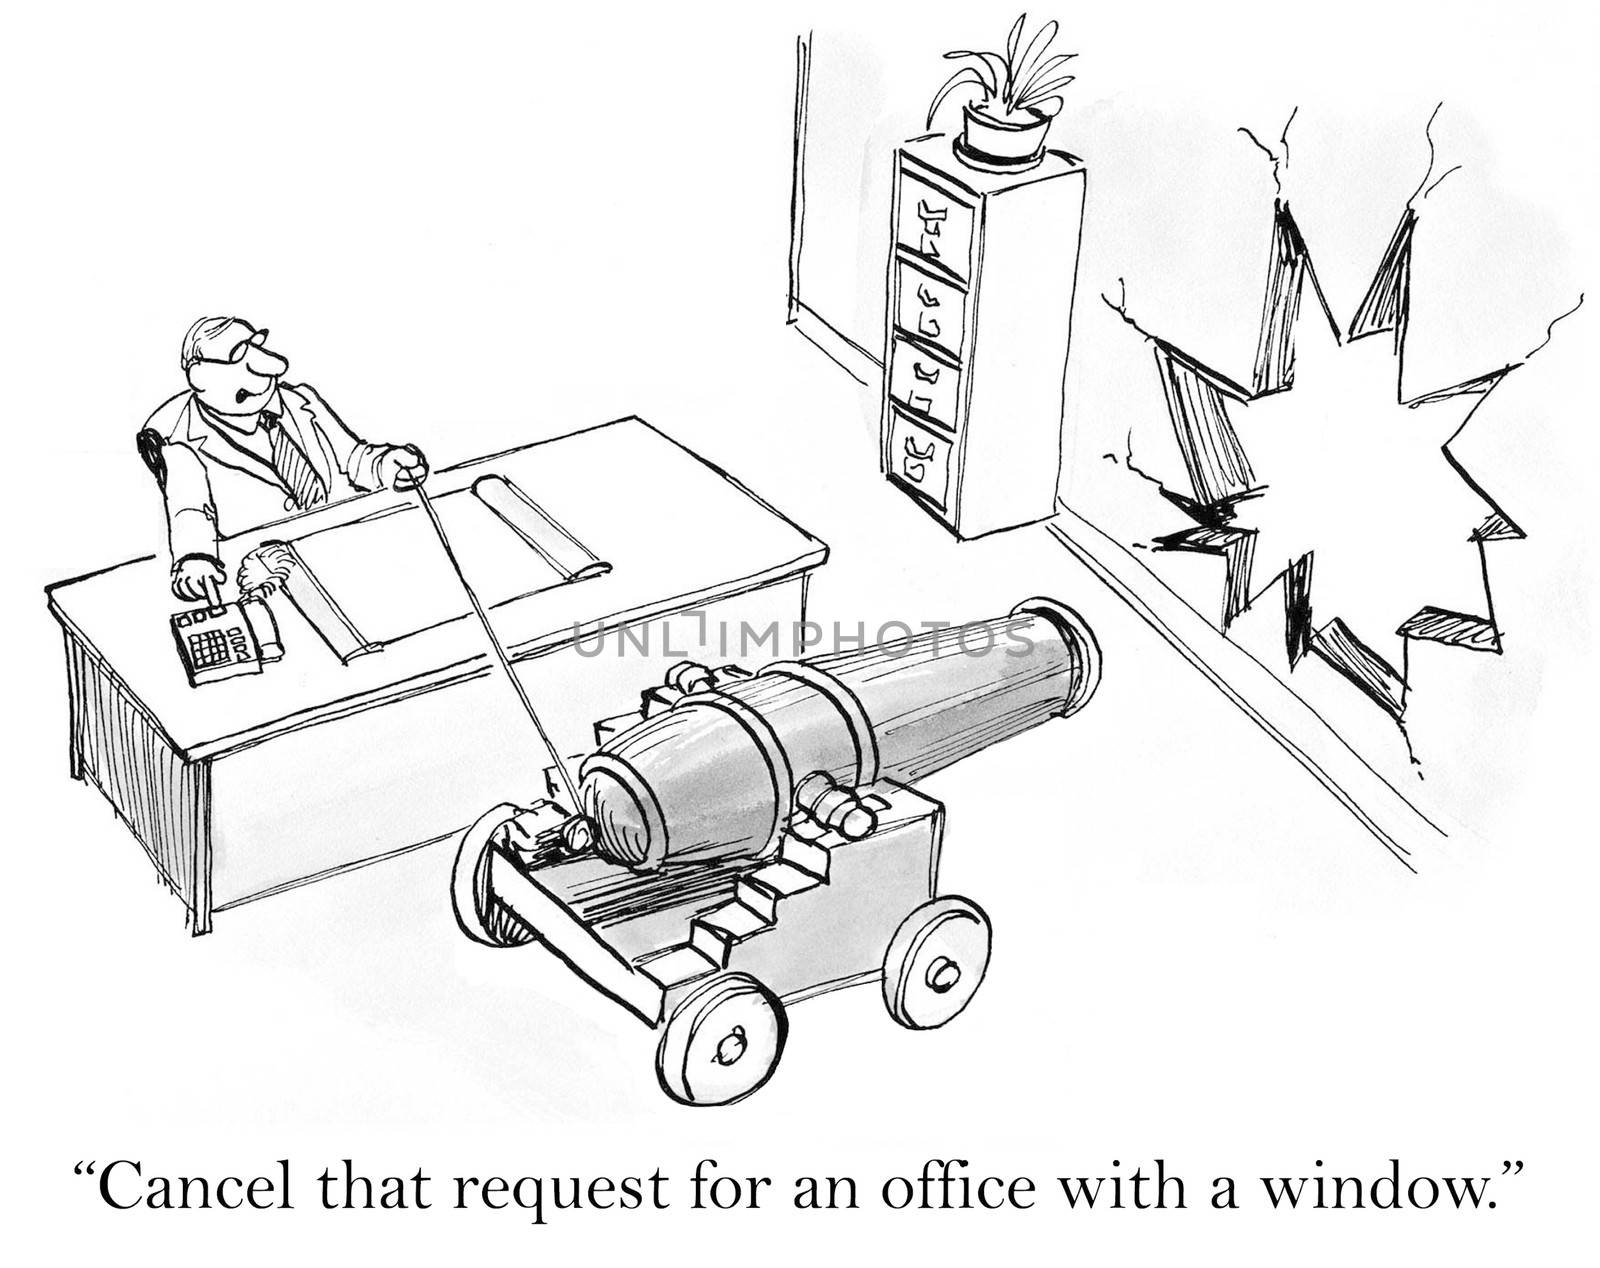 "Cancel that request for an office with a window."